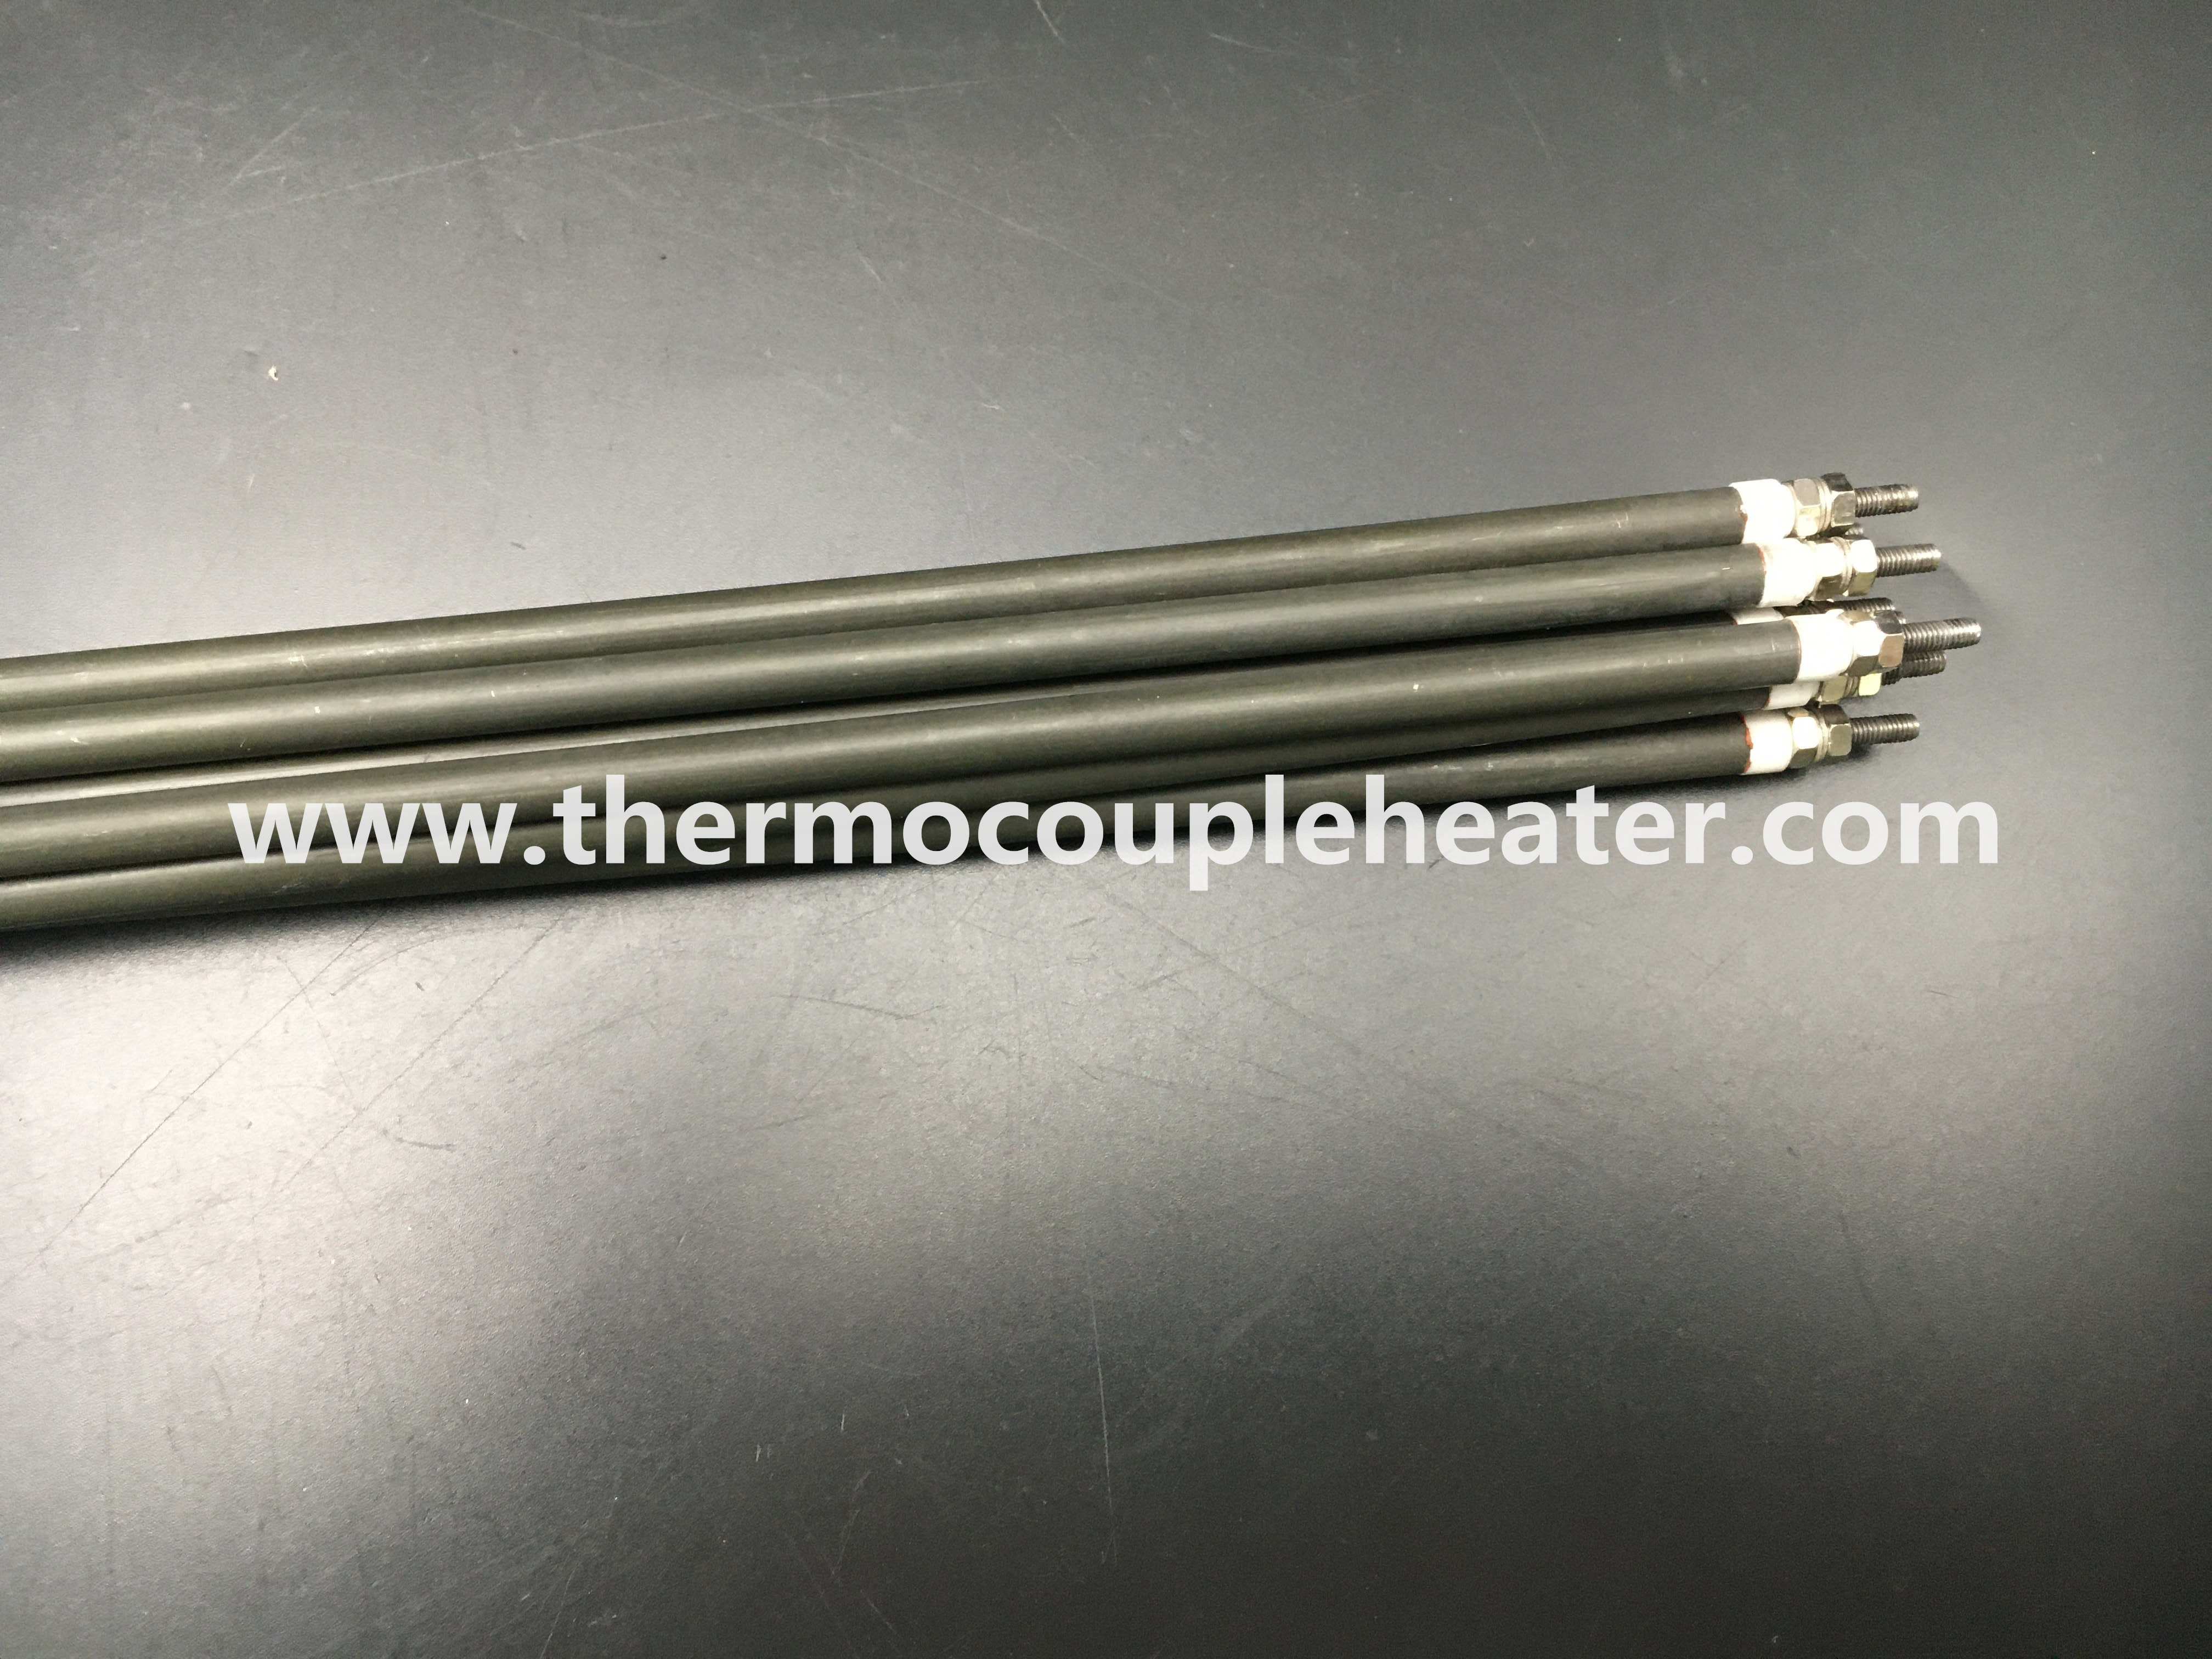 Flexible Tubular Heater Smooth Surface For Platens And Manifolds Heating